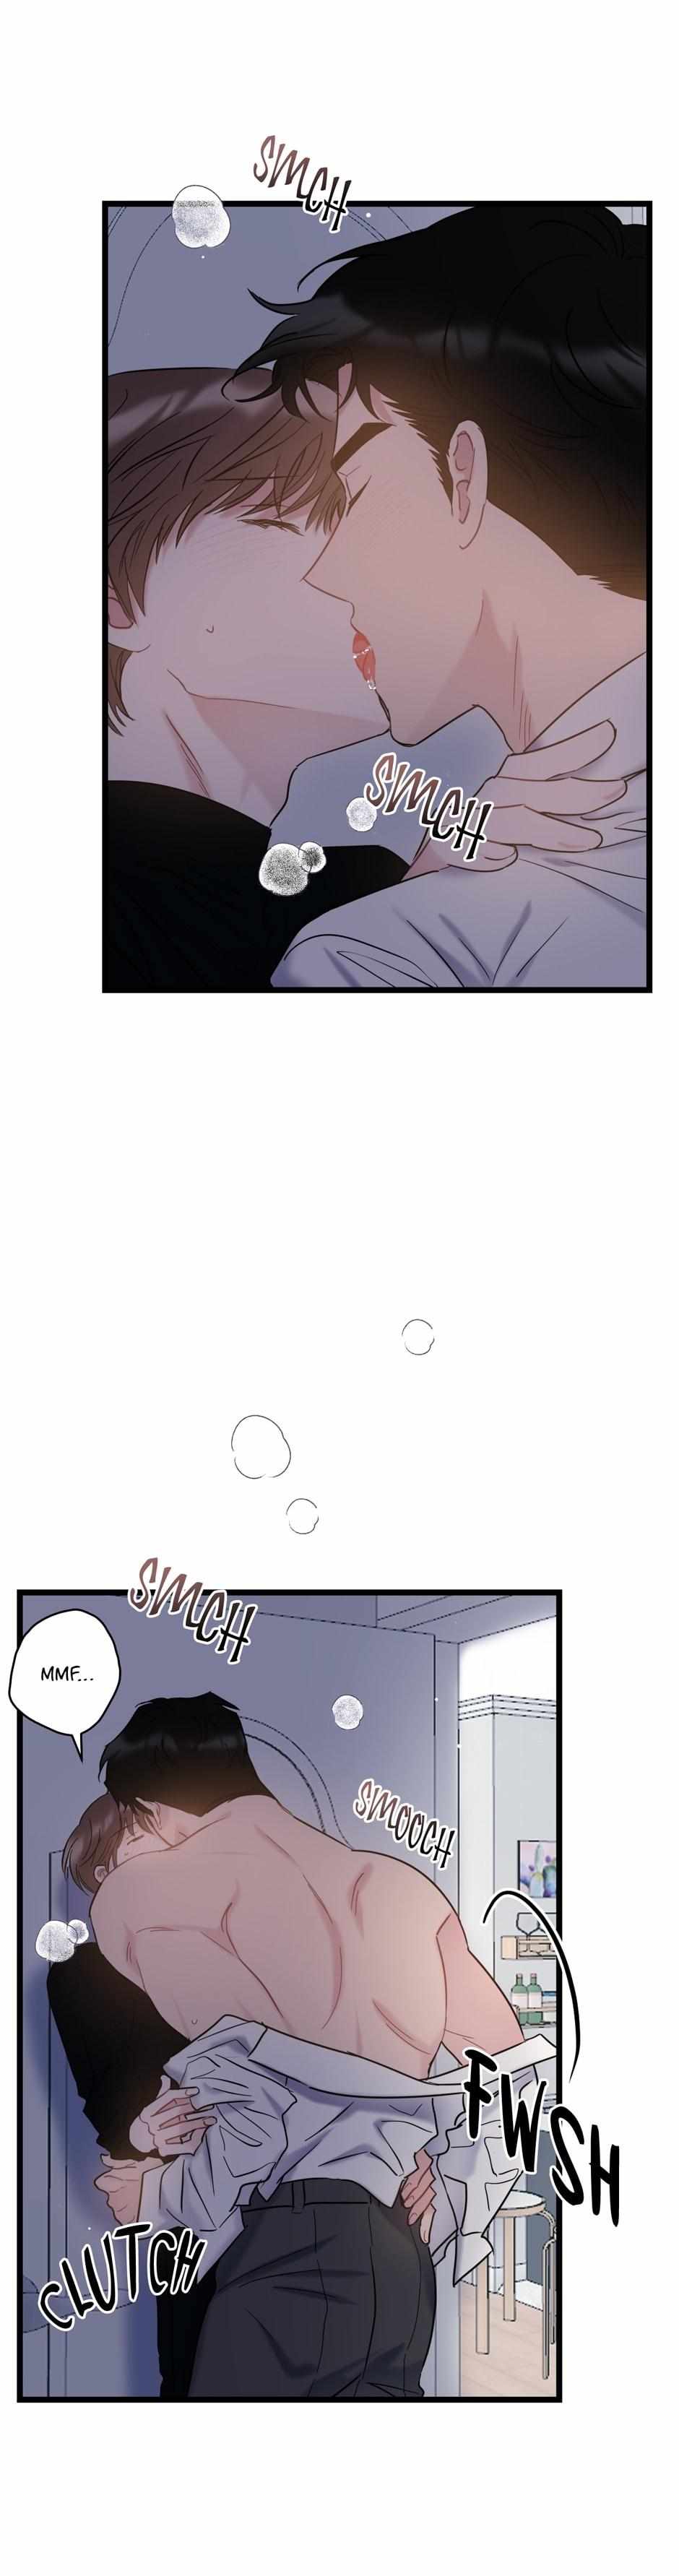 The Most Ordinary Relationship - Page 3